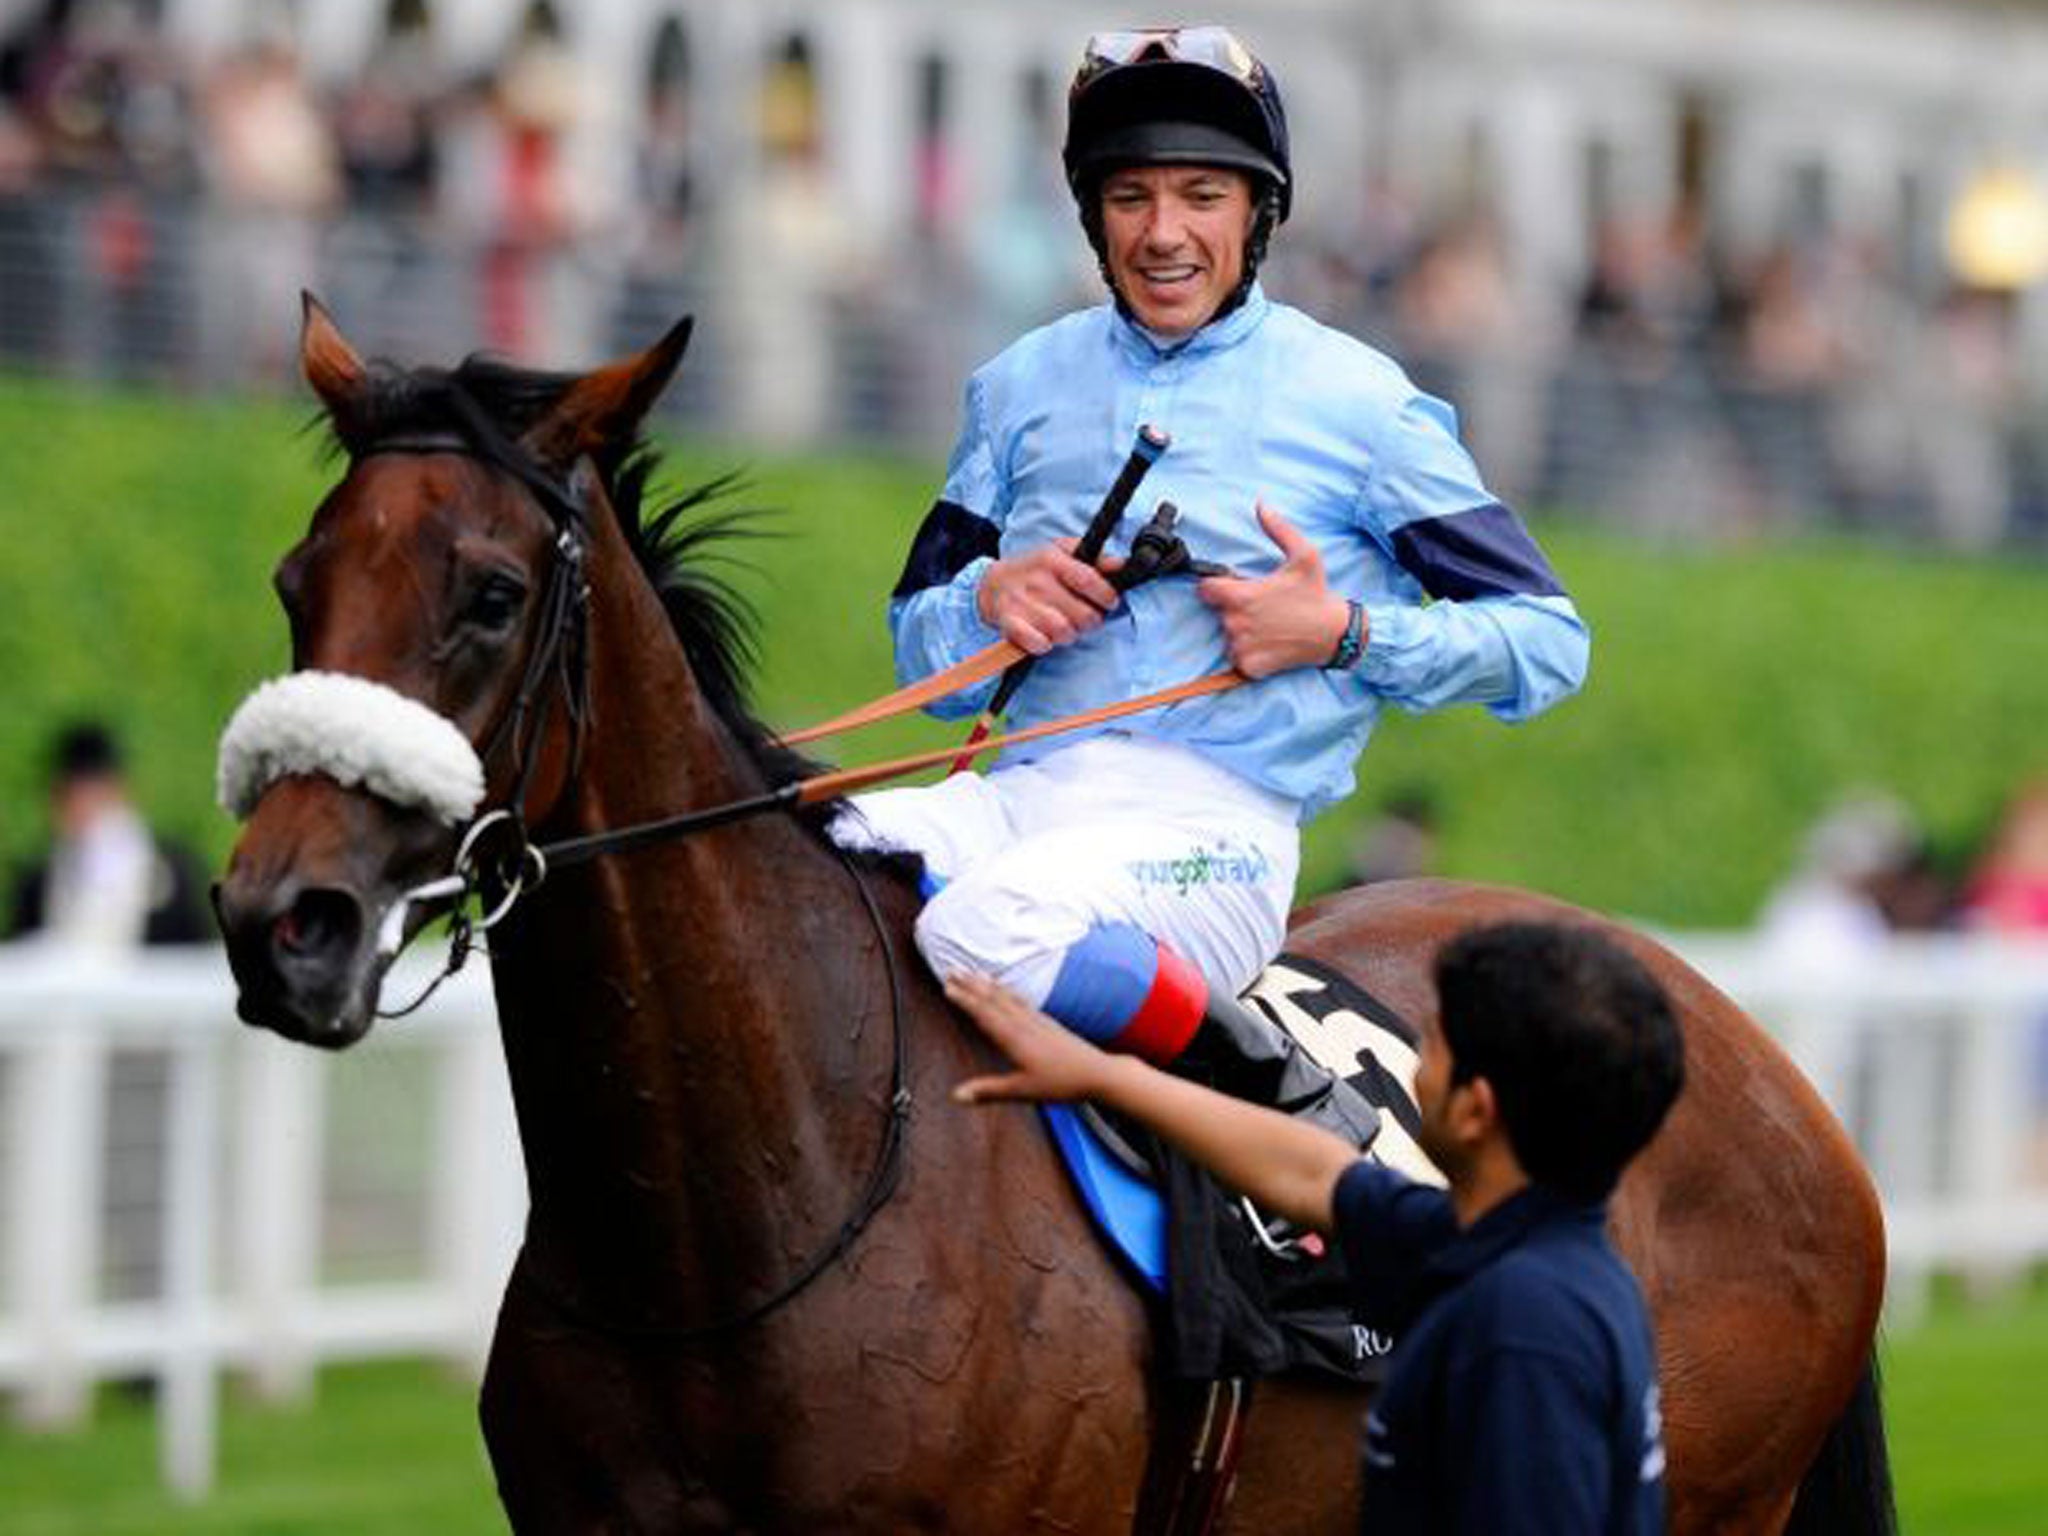 Frankie Dettori, who rode for Godolphin until last autumn, has signed a retainer with Sheikh Joaan al-Thani